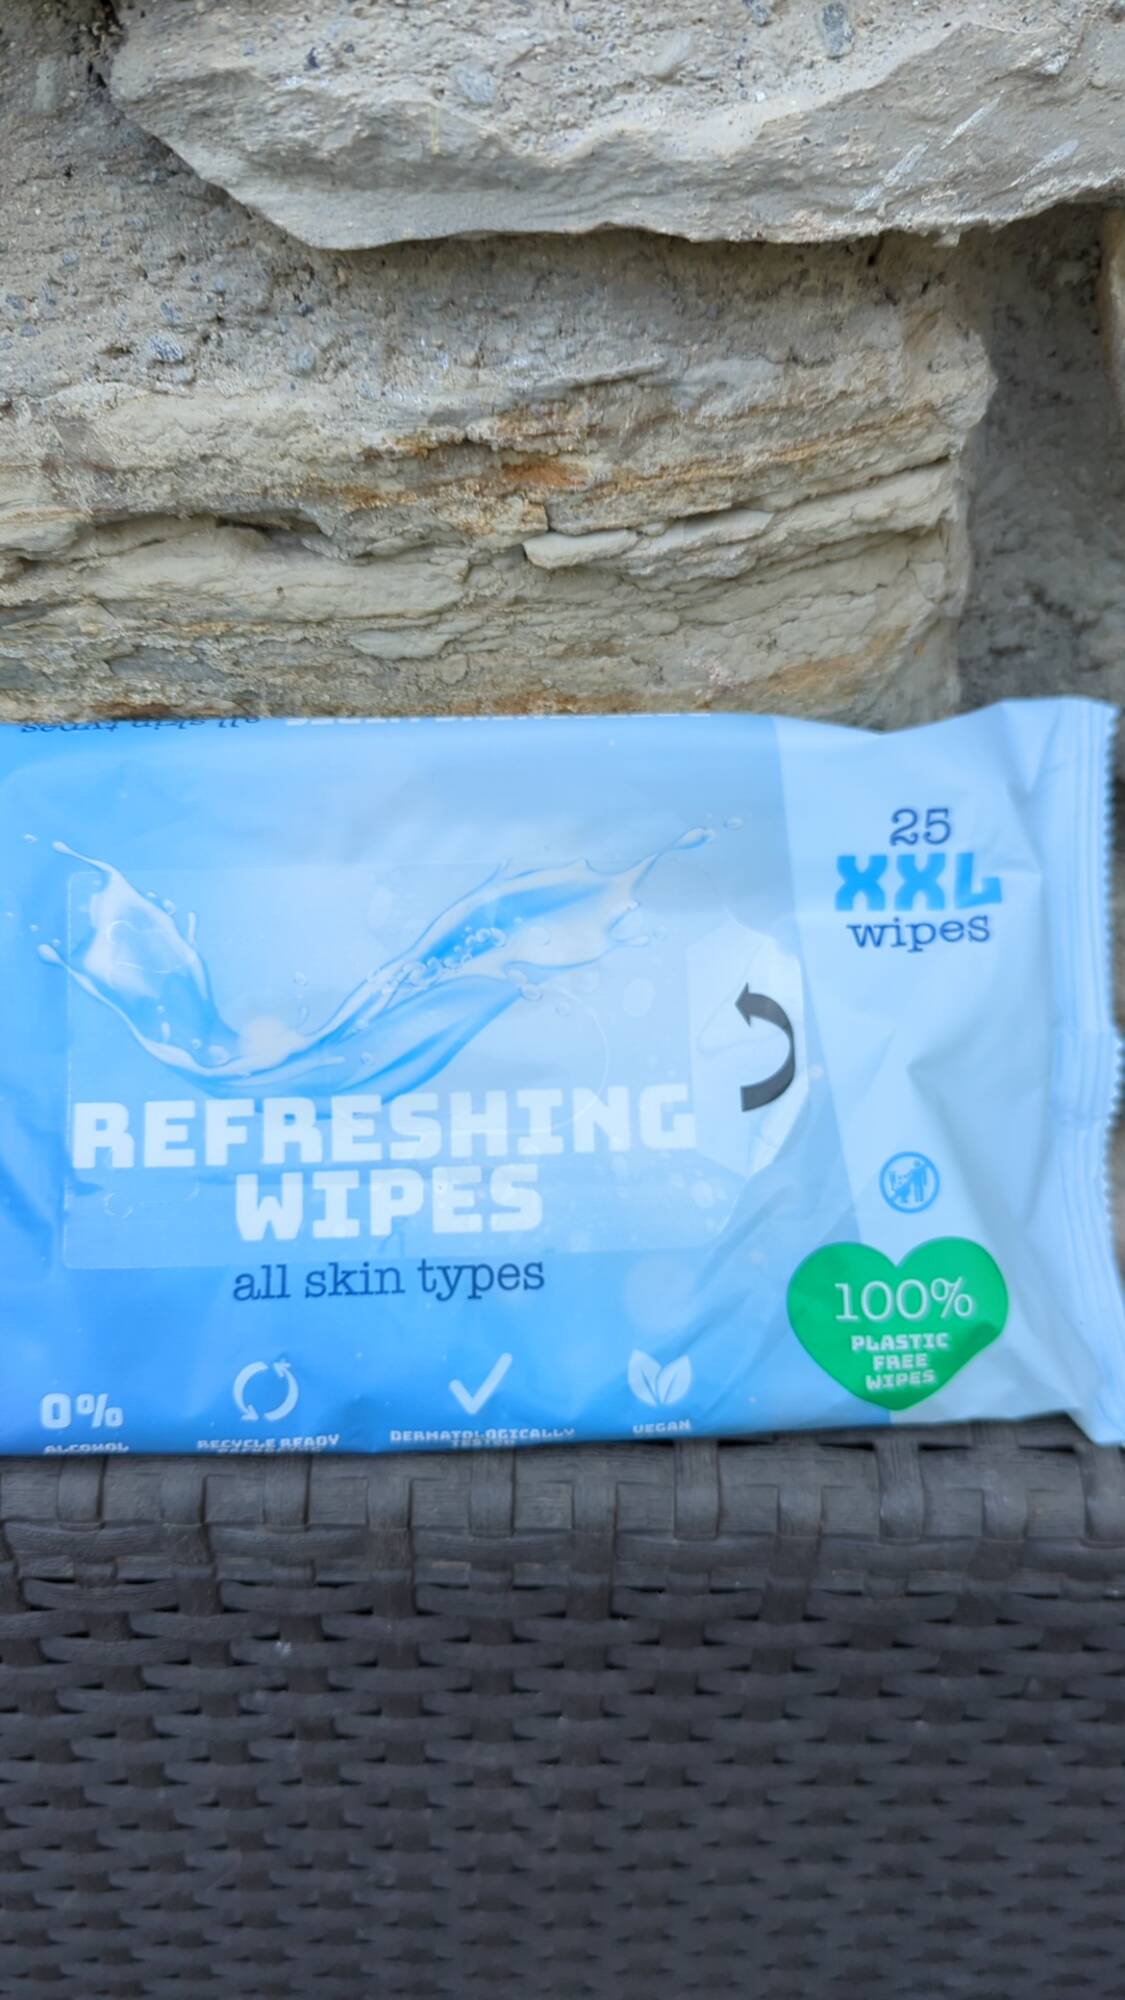 CODIGROUP - Refreshing wipes - all skin types